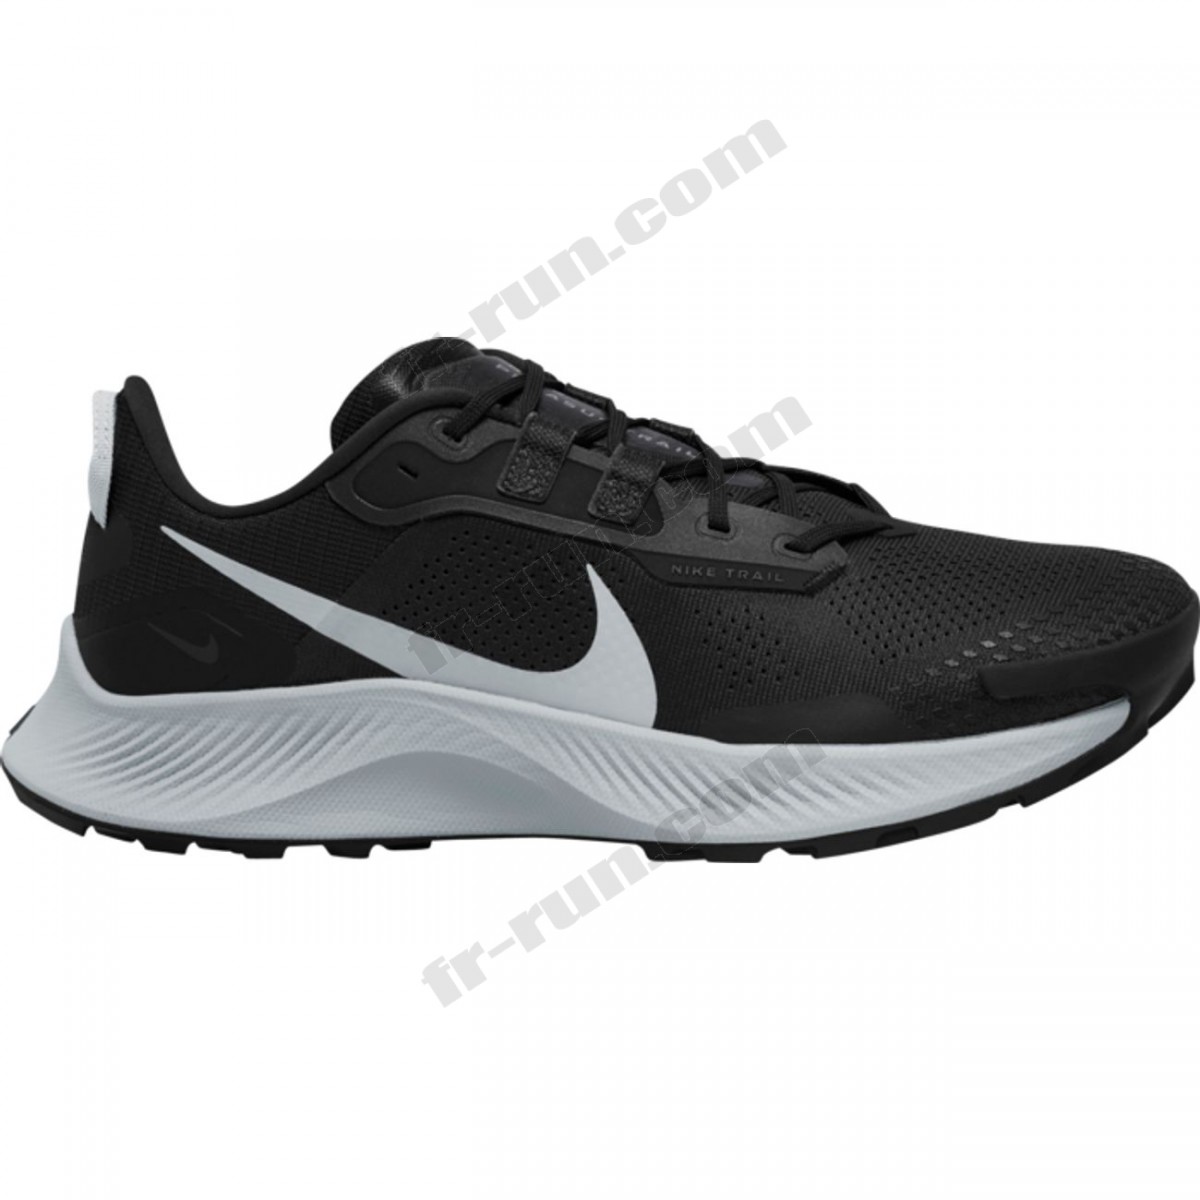 Nike/CHAUSSURES BASSES Trail homme NIKE NIKE PEGASUS TRAIL 3 √ Nouveau style √ Soldes - -0